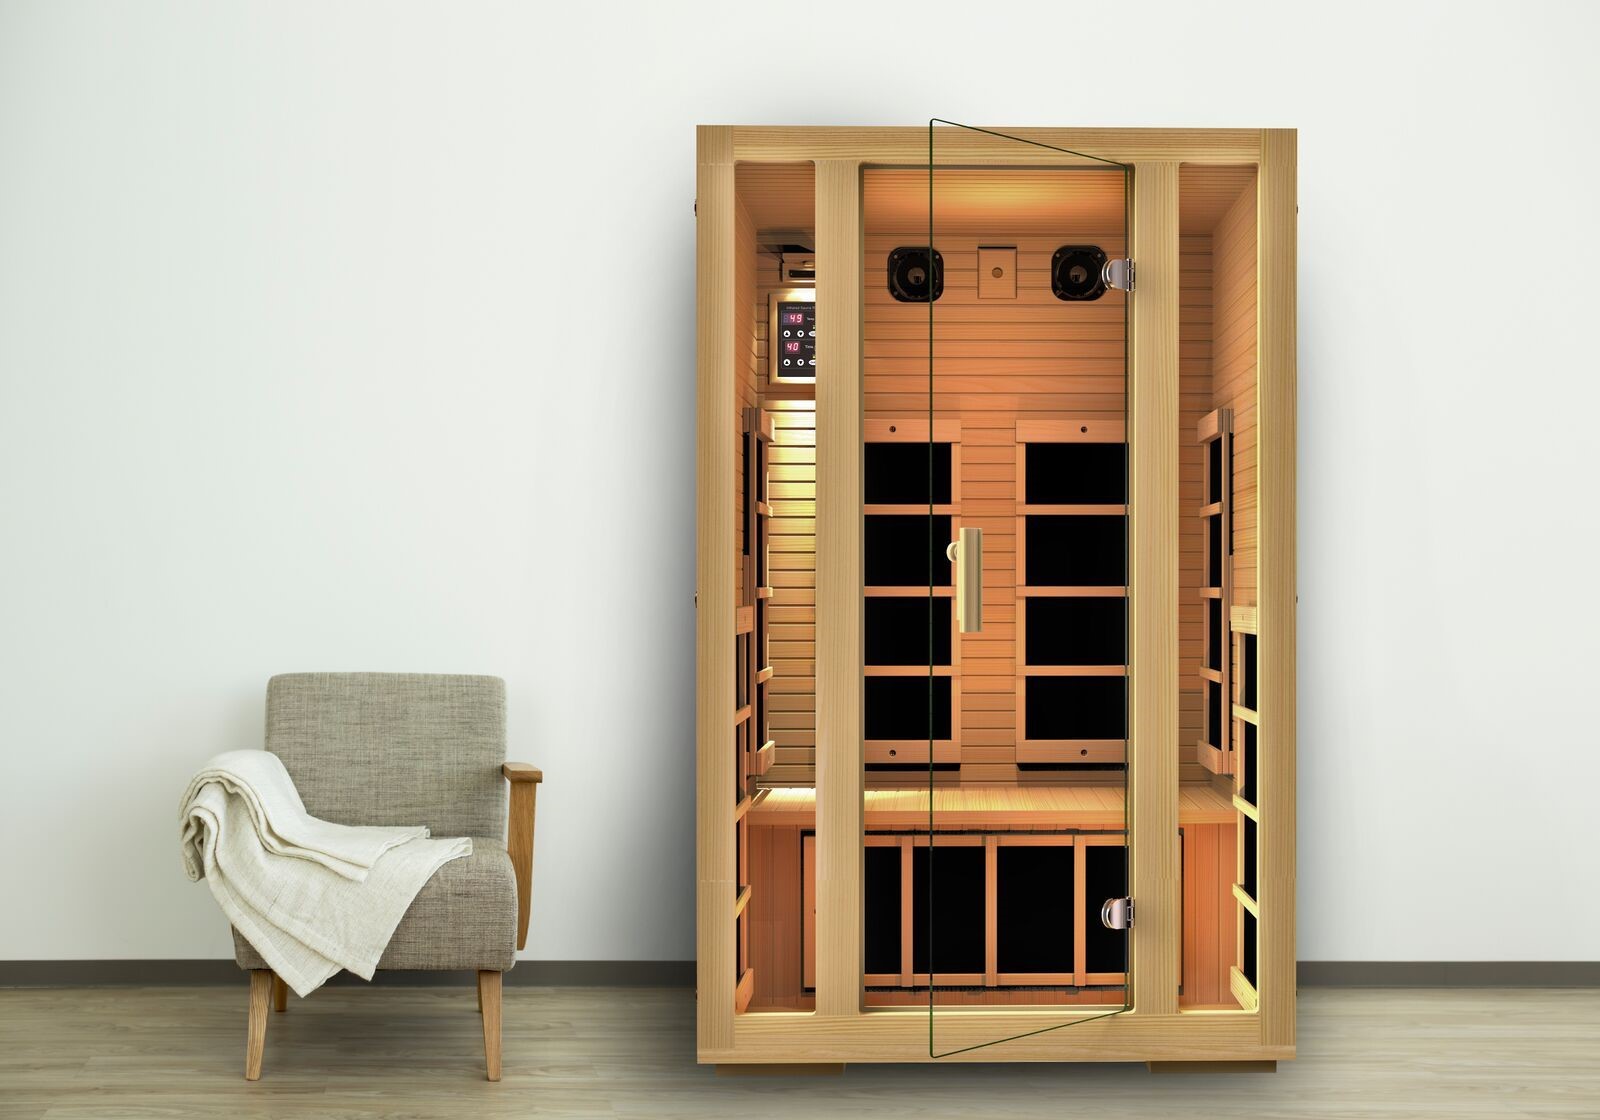 You Should Buy an Infrared Sauna to Reduce Toxin Levels in Your Body